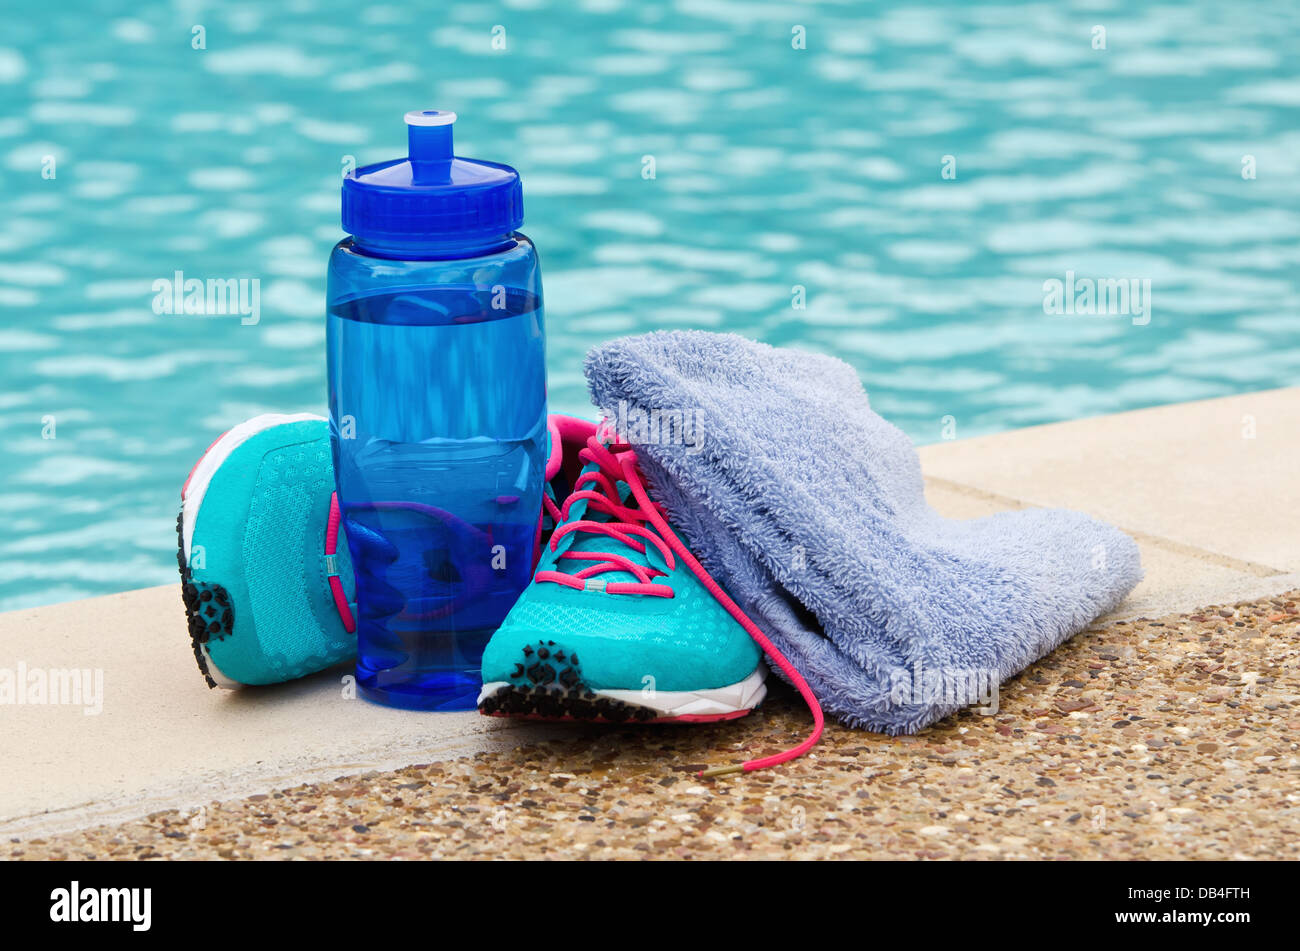 Blue water bottle with running shoes and towel by pool. Exercise and hydration concept. Stock Photo